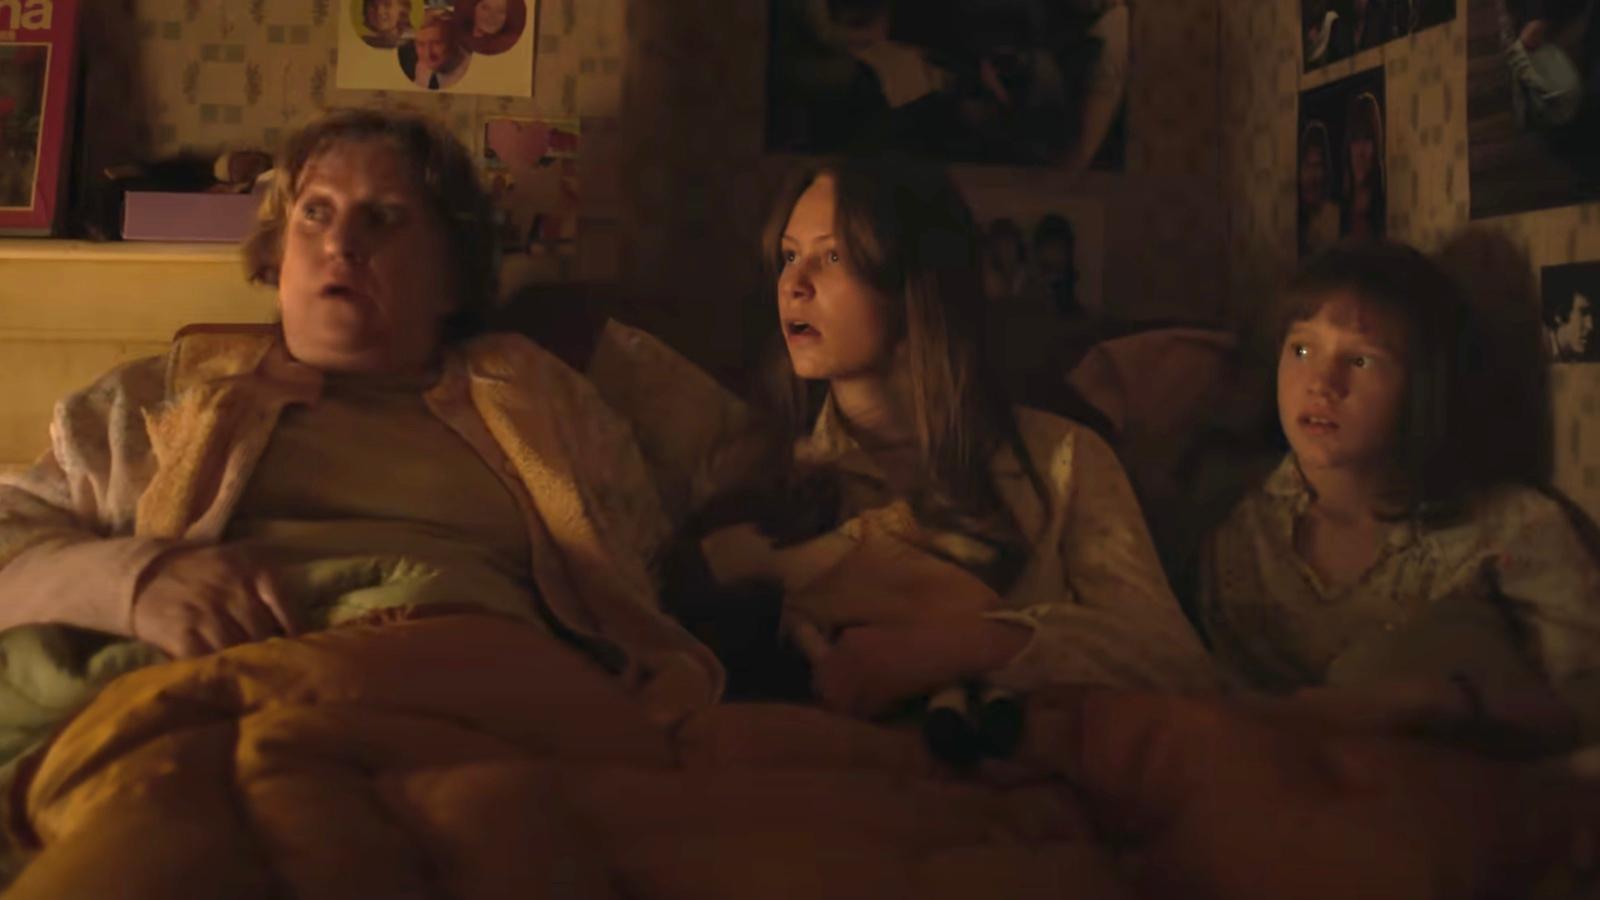 Still from The Enfield Poltergeist on Apple TV+